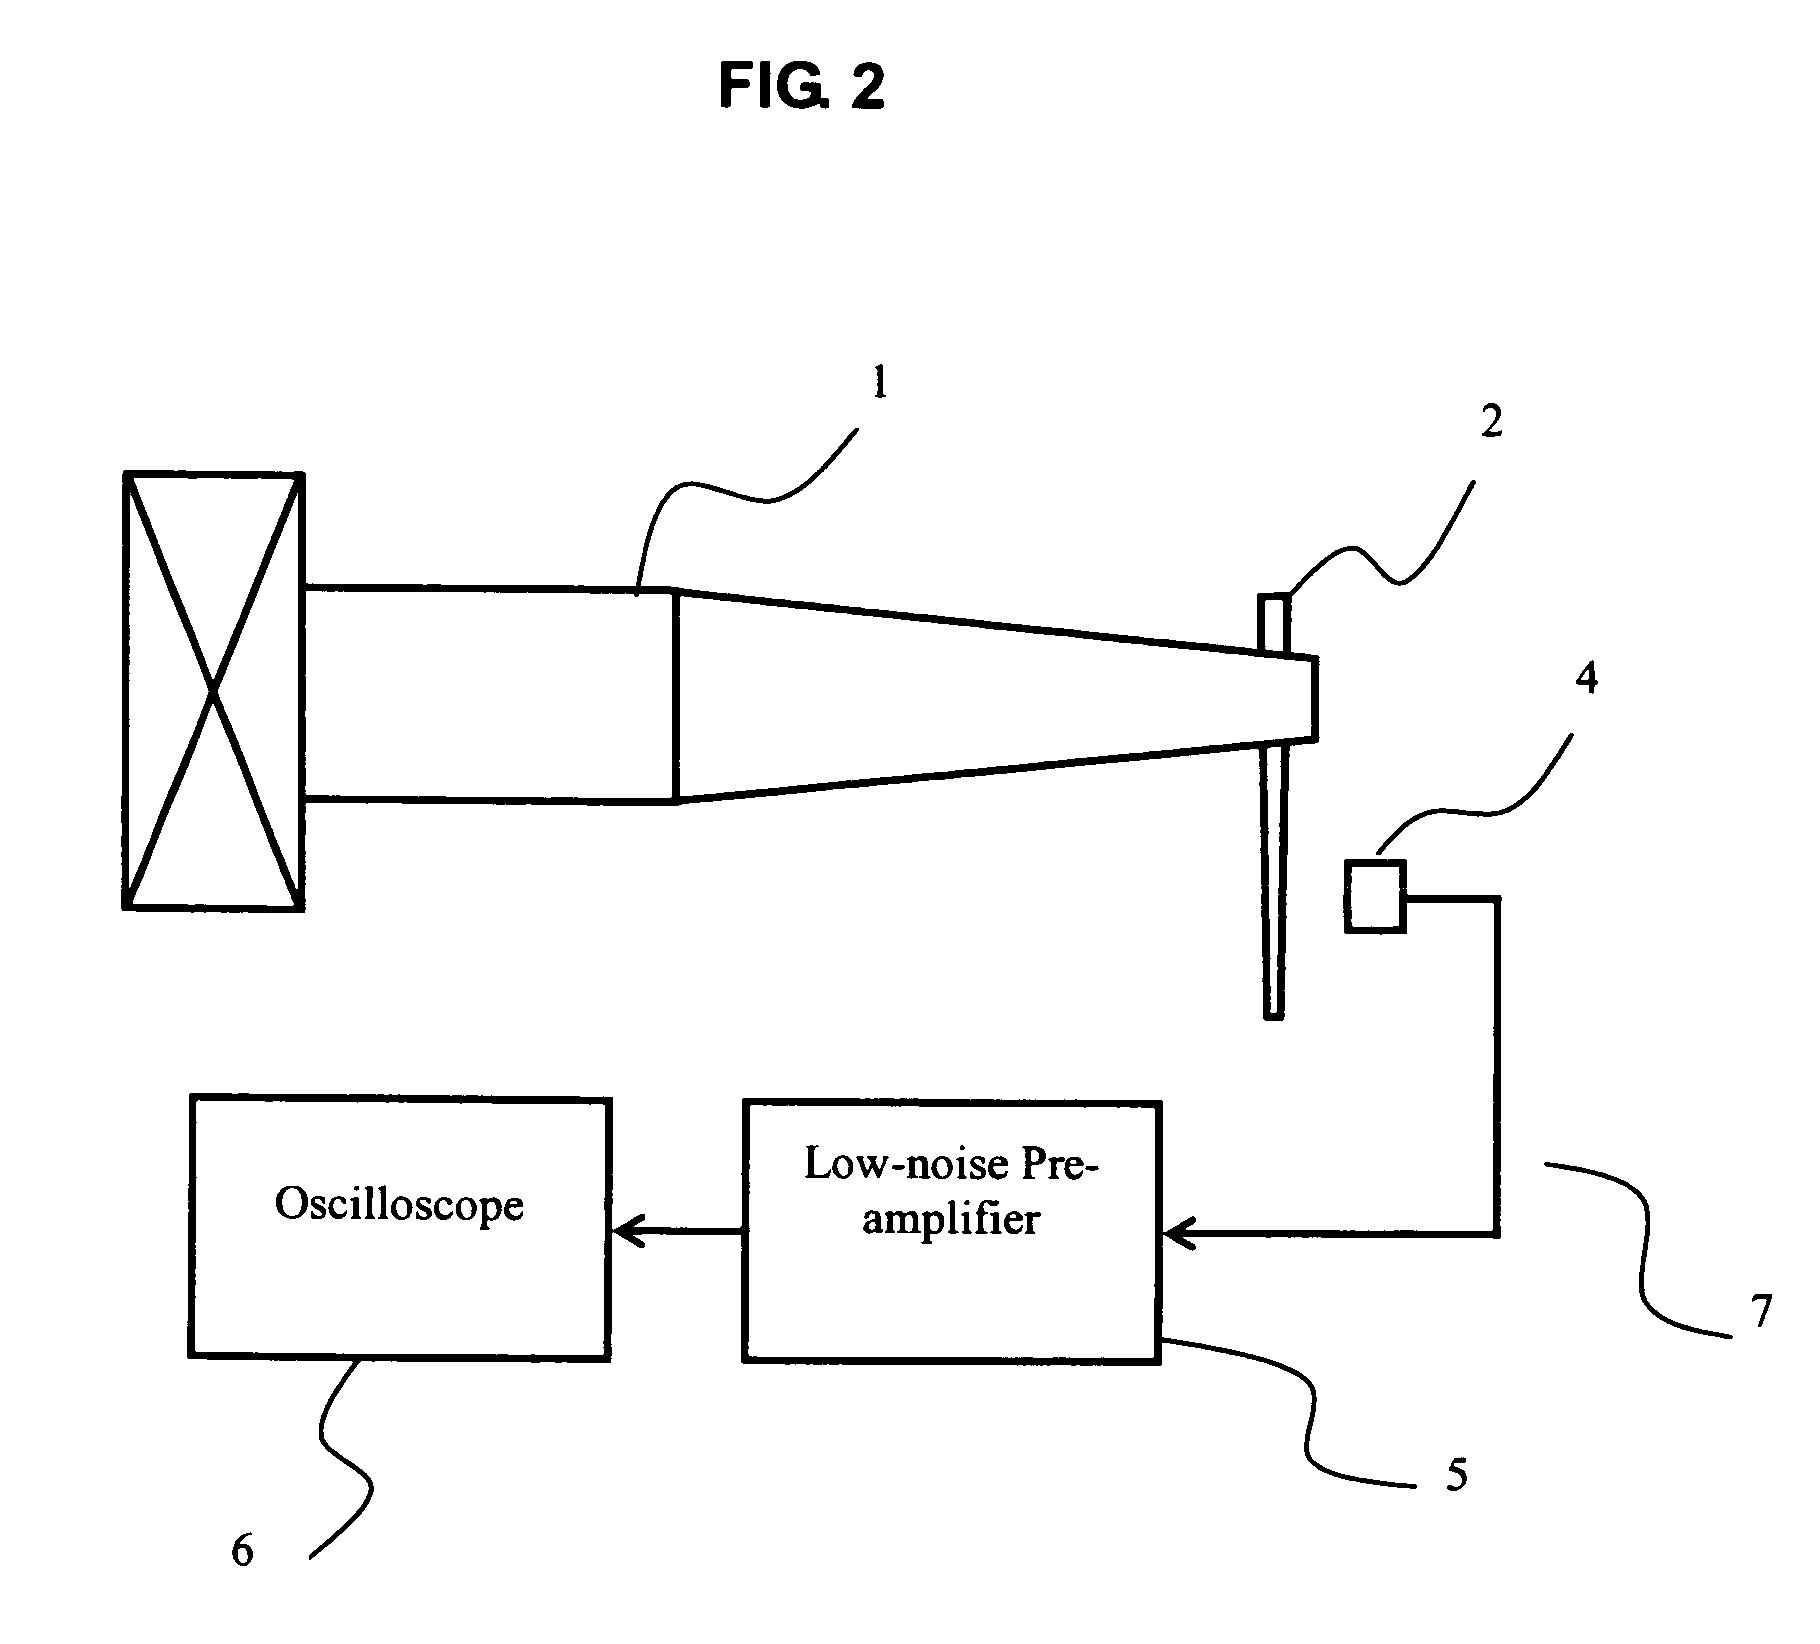 Method and apparatus for measuring oscillation amplitude of an ultrasonic device